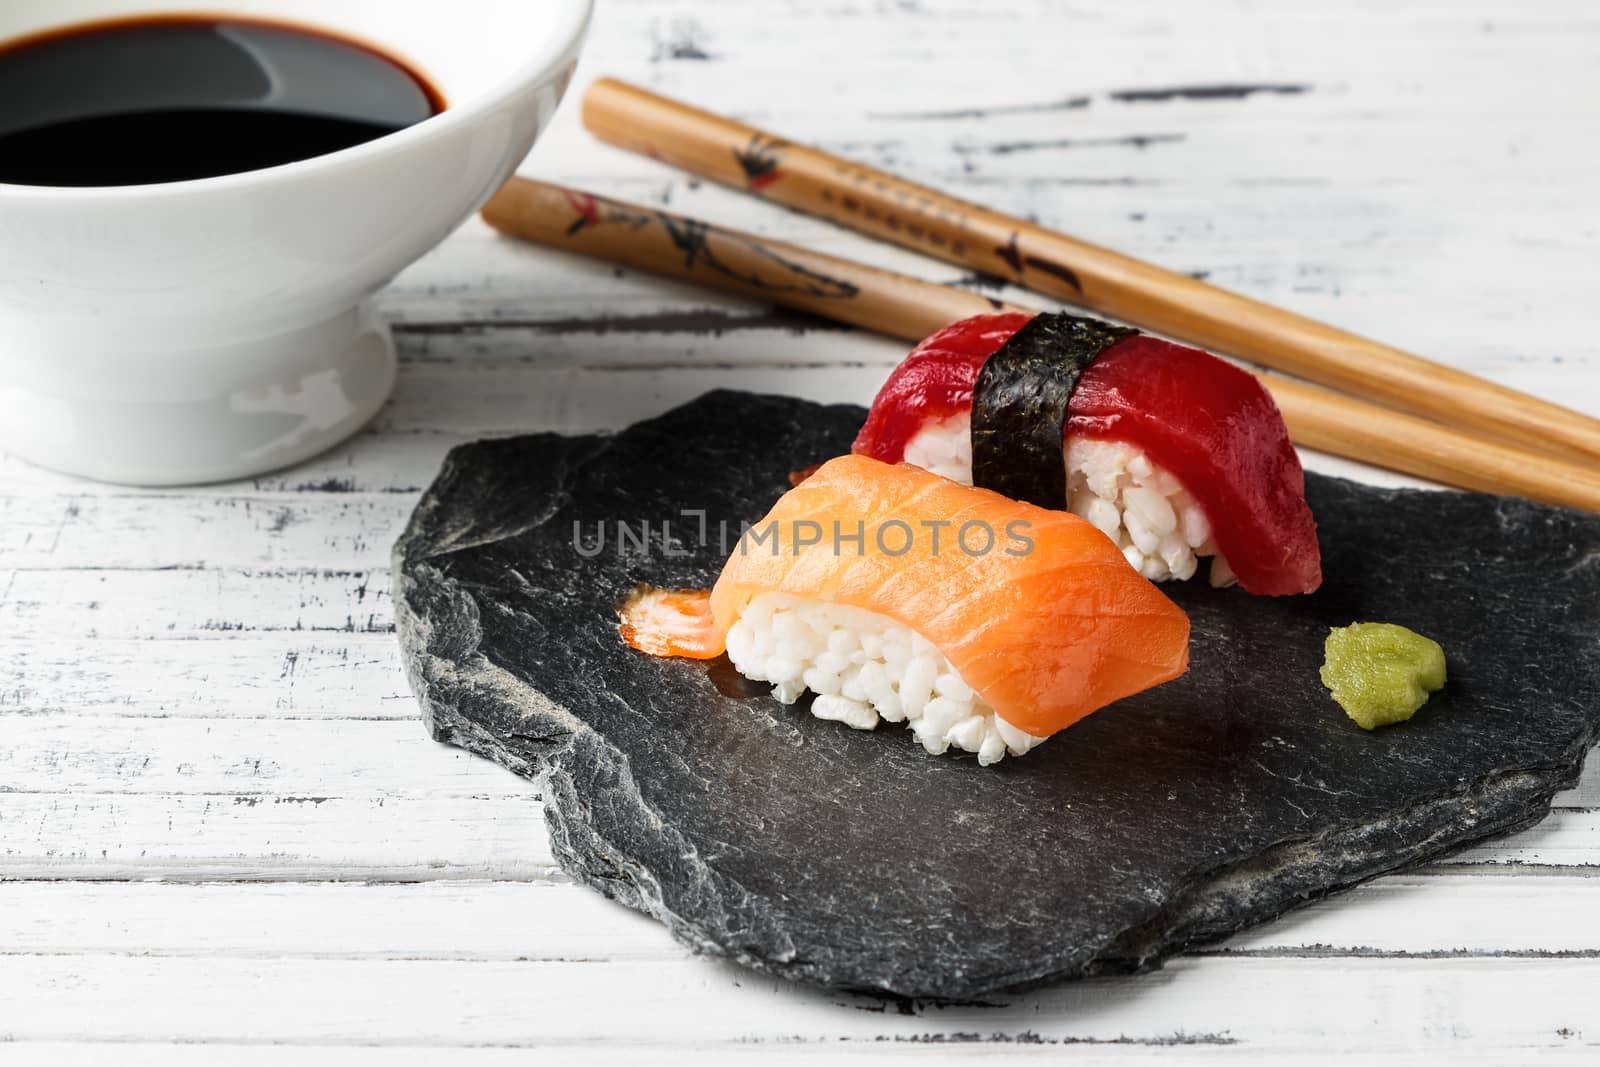 Smoked salmon Nigiri with wasabi paste and red tuna nigiri on slate stone. Chopsticks and bowl with soy sauce in the background on old white wood. Raw fish in traditional Japanese sushi style. Horizontal image.